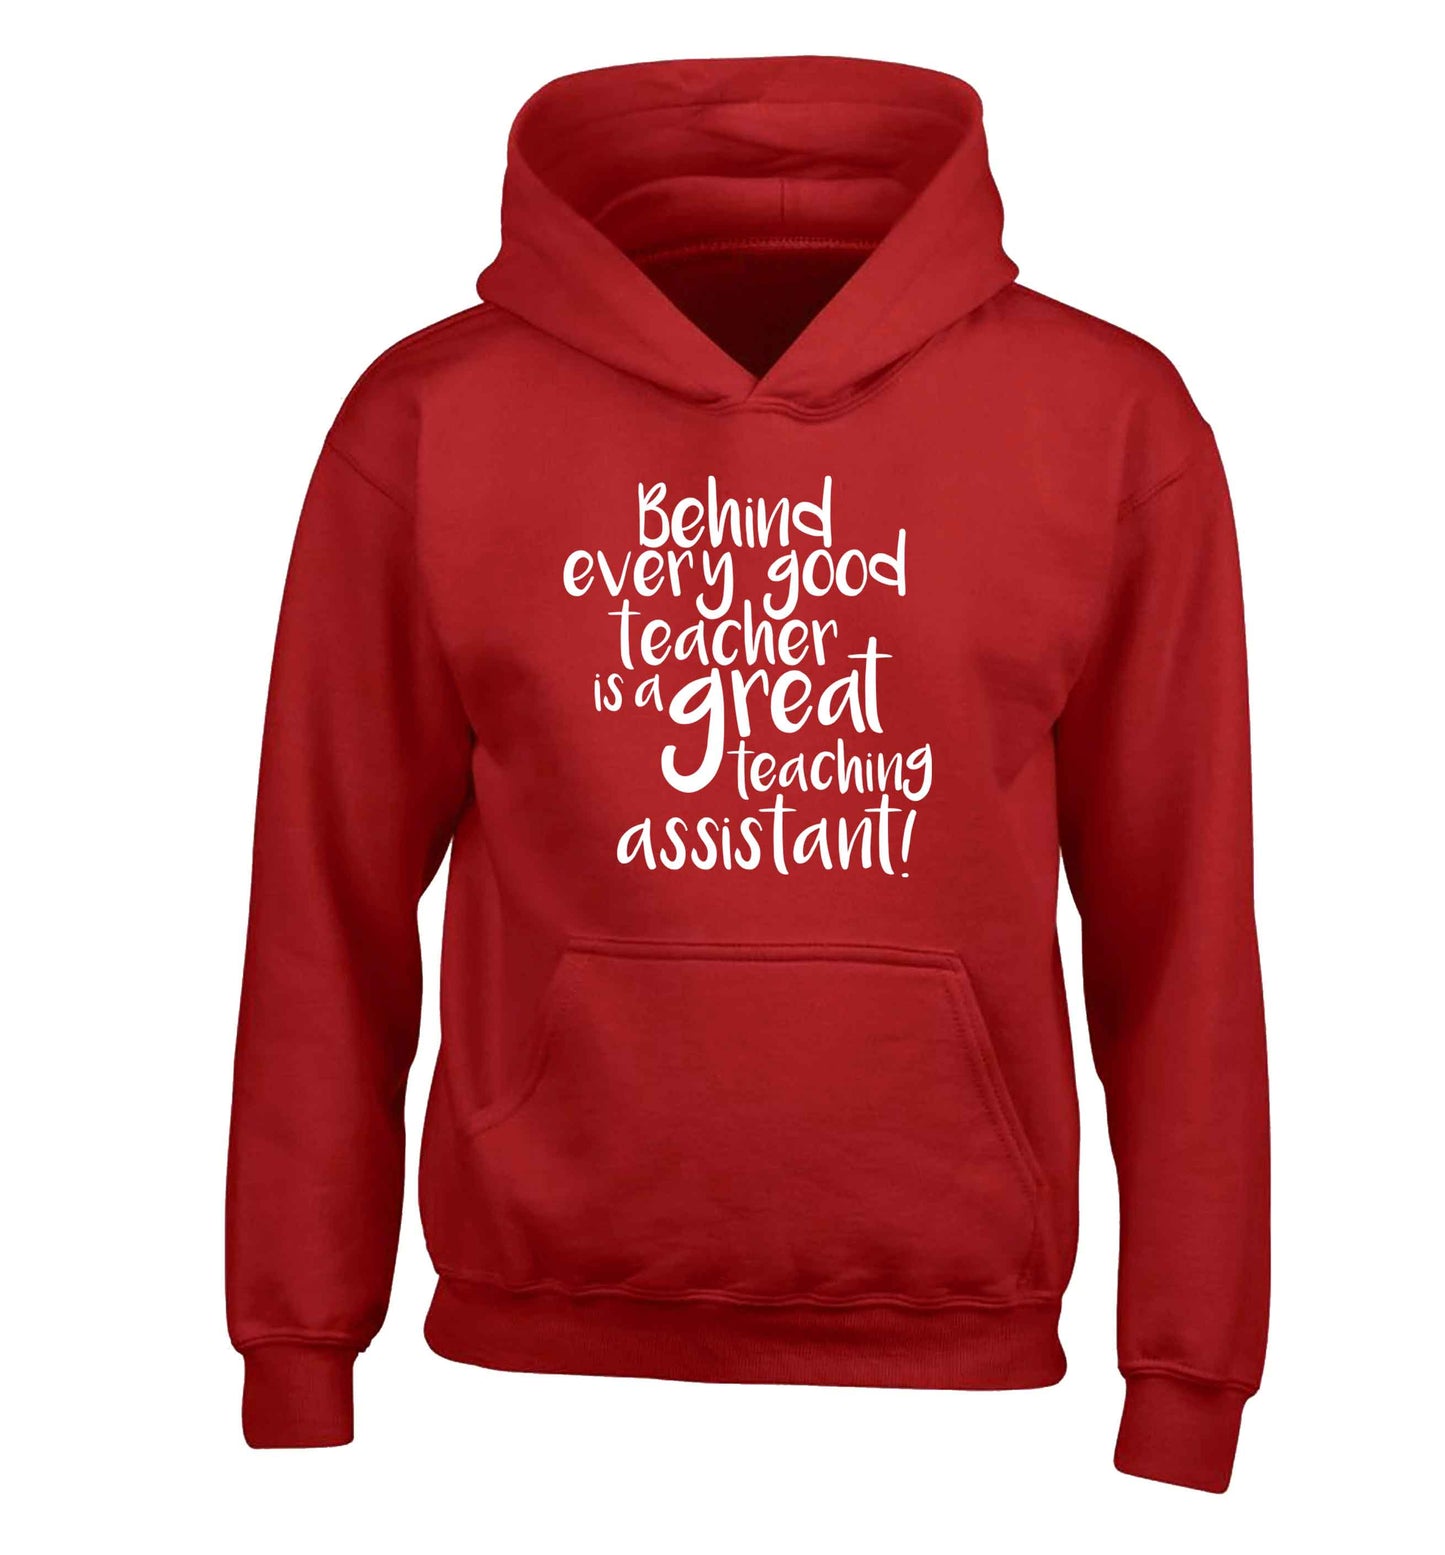 Behind every good teacher is a great teaching assistant children's red hoodie 12-13 Years